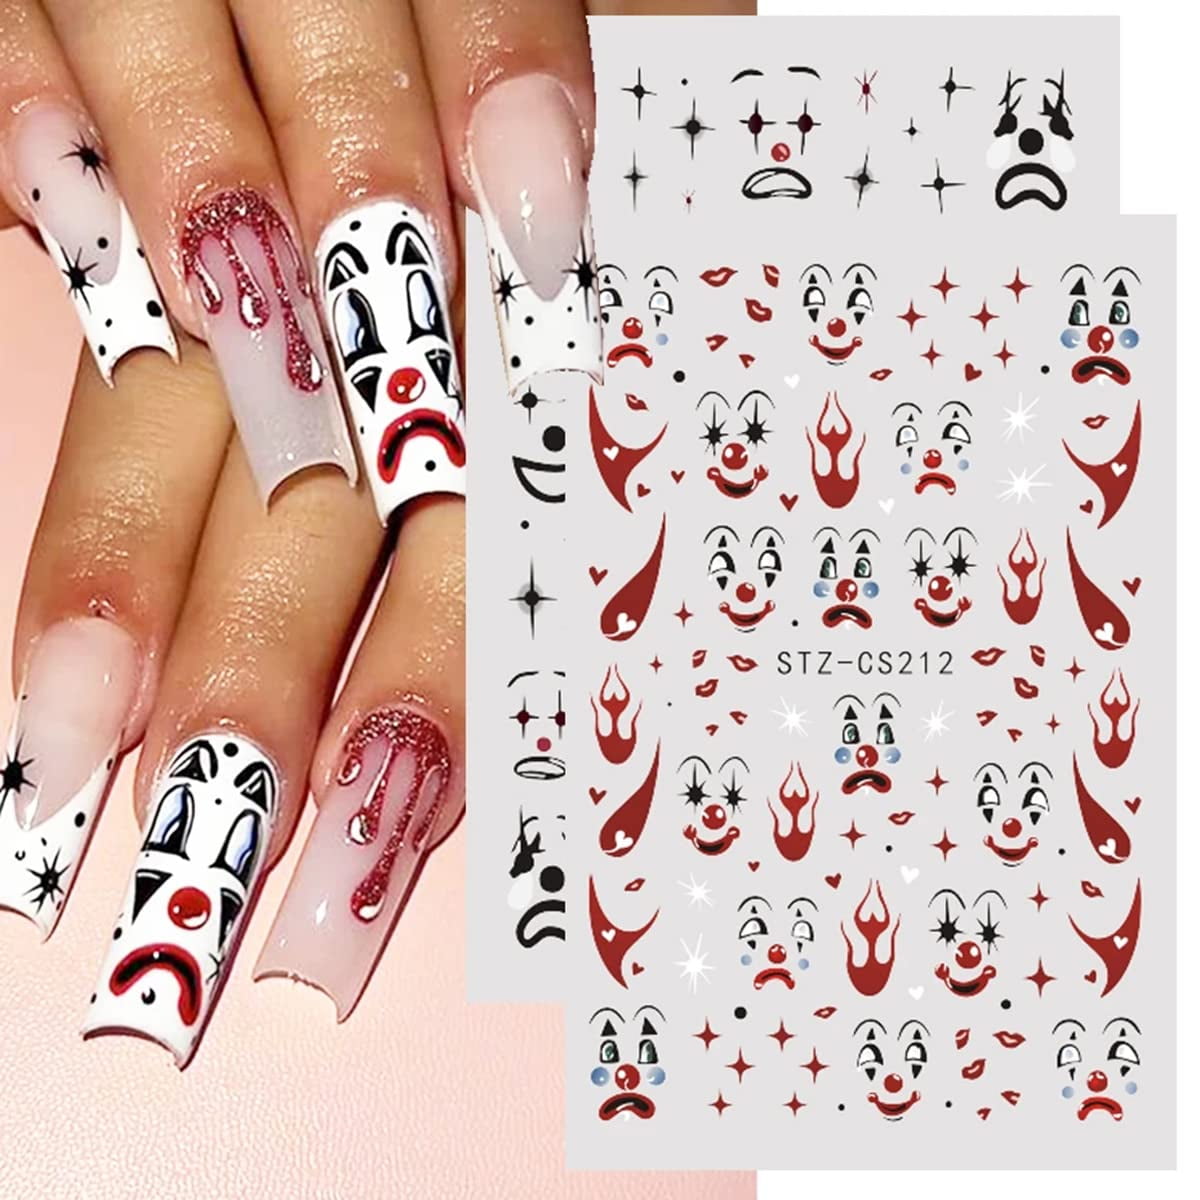 3D Nails Game Manicure Salon - Apps on Google Play